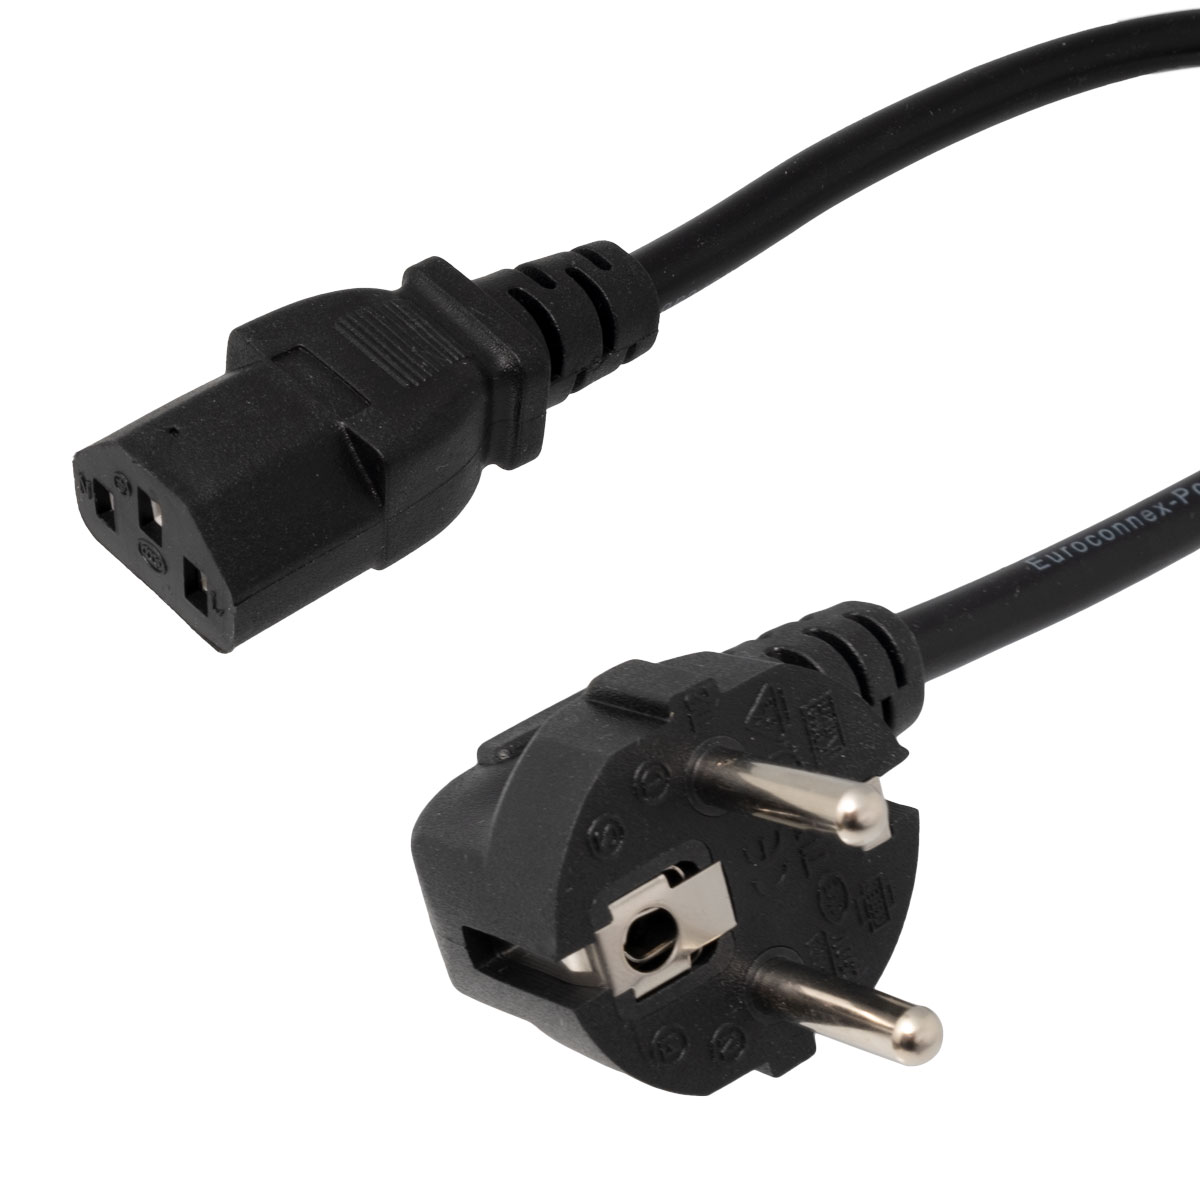 Schuko Male to IEC C13 Power Cable, Black, 3m